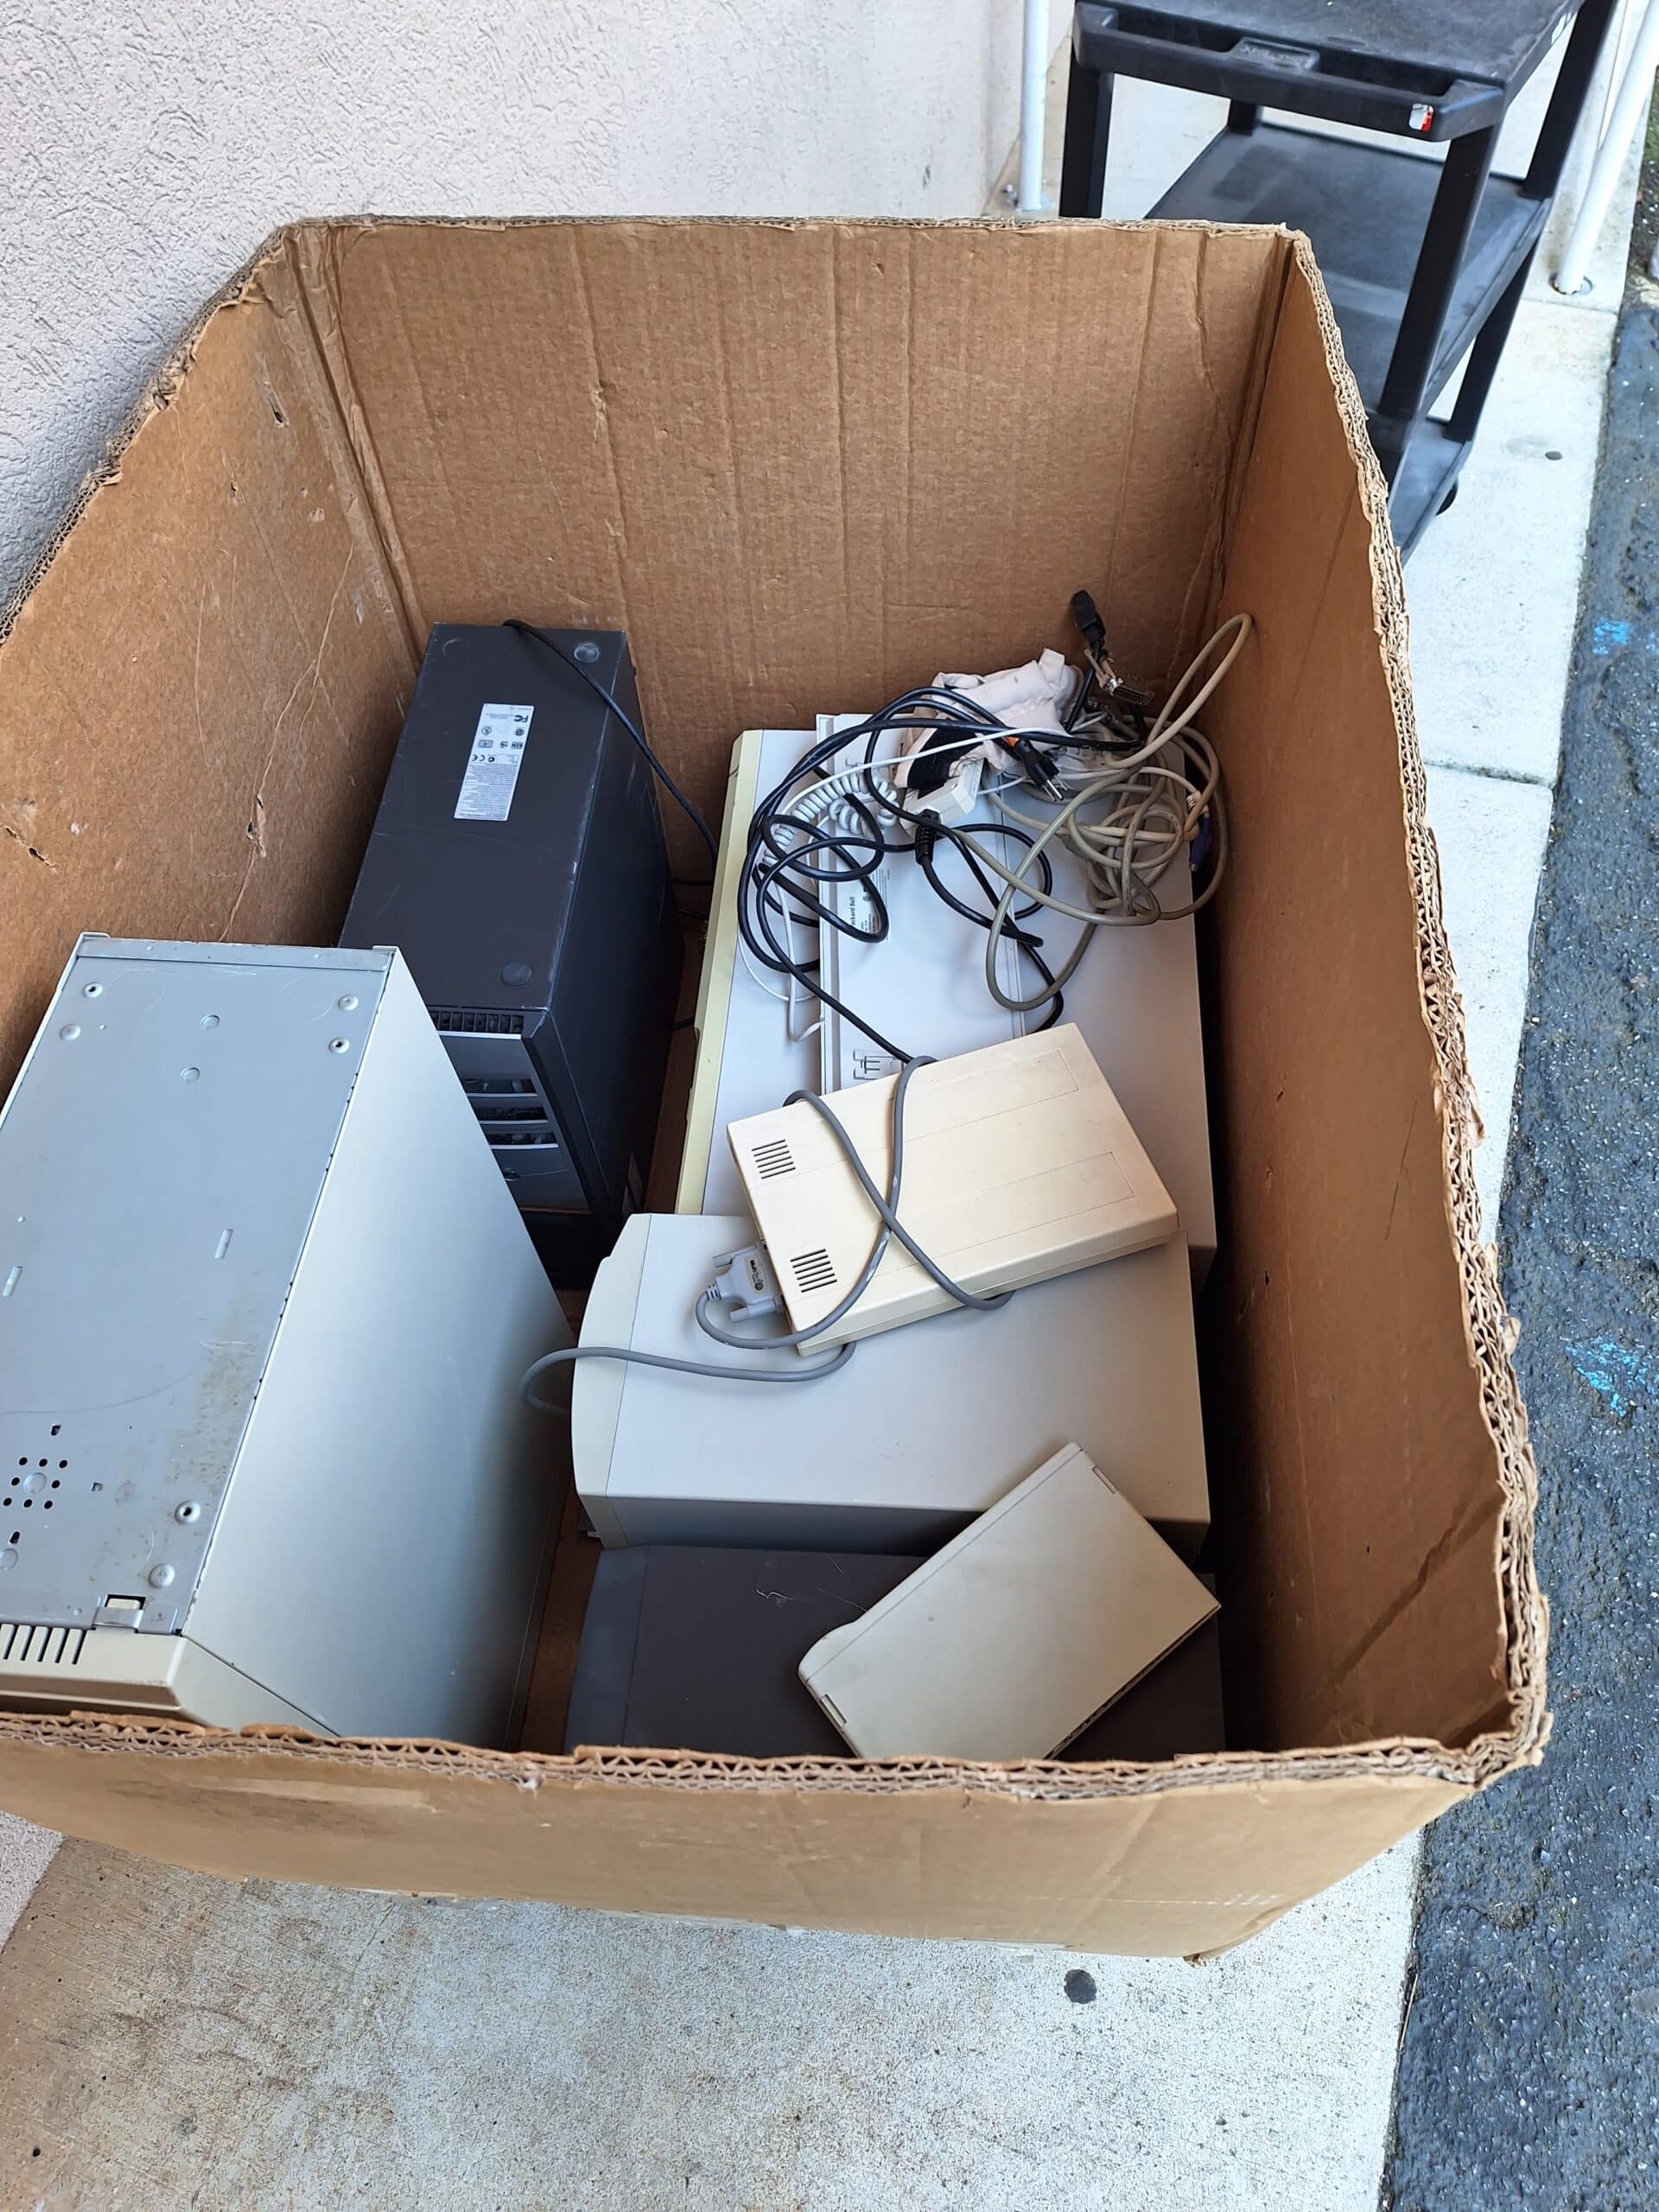 Lawrenceville Computer Electronics Recycling